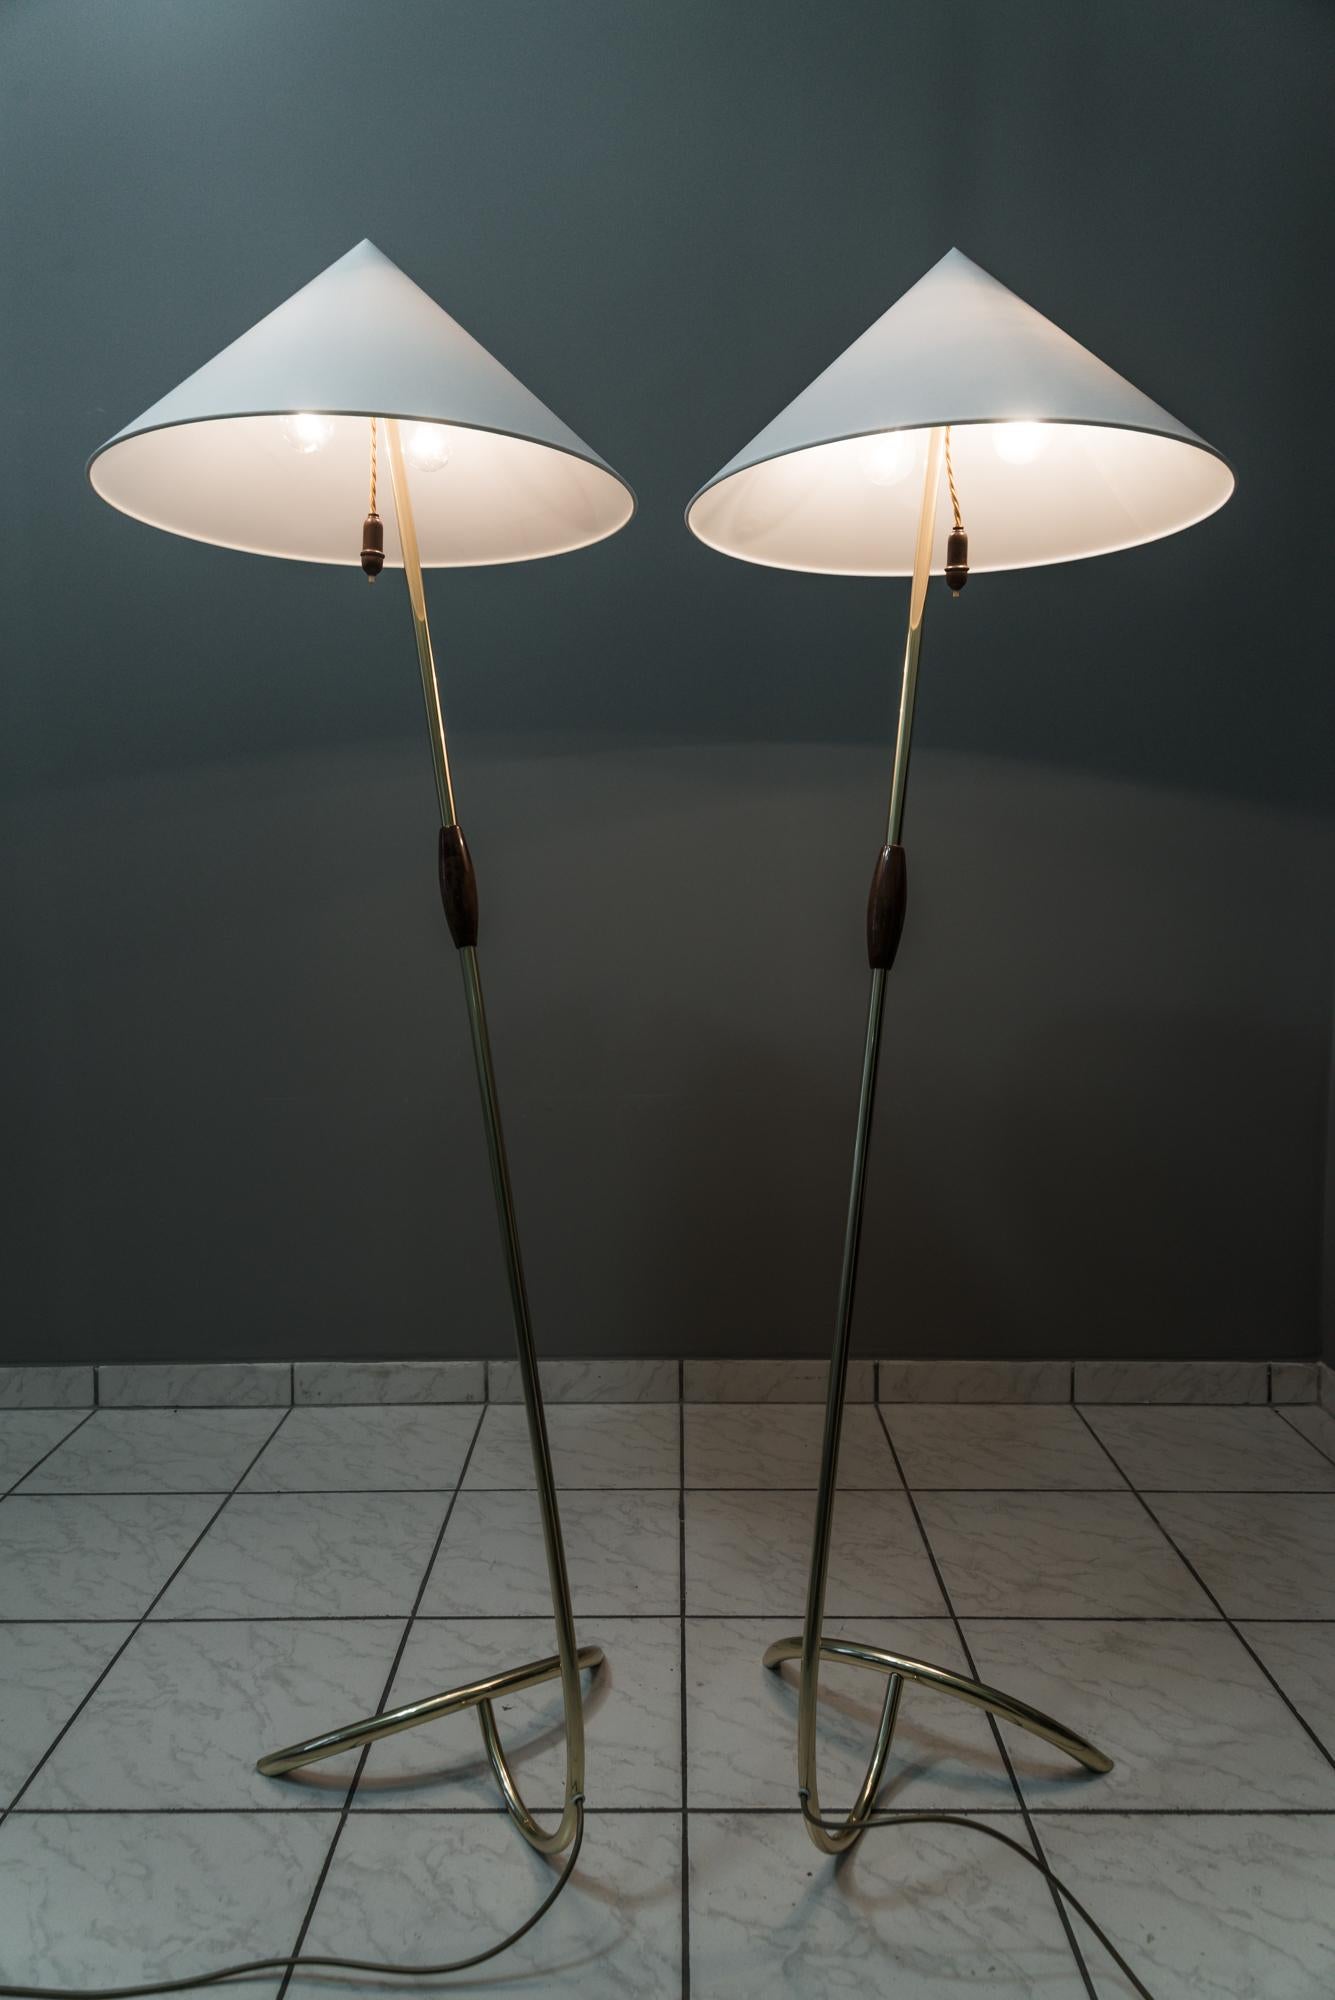 Two Rupert Nikoll Floor Lamps, circa 1950s For Sale 3